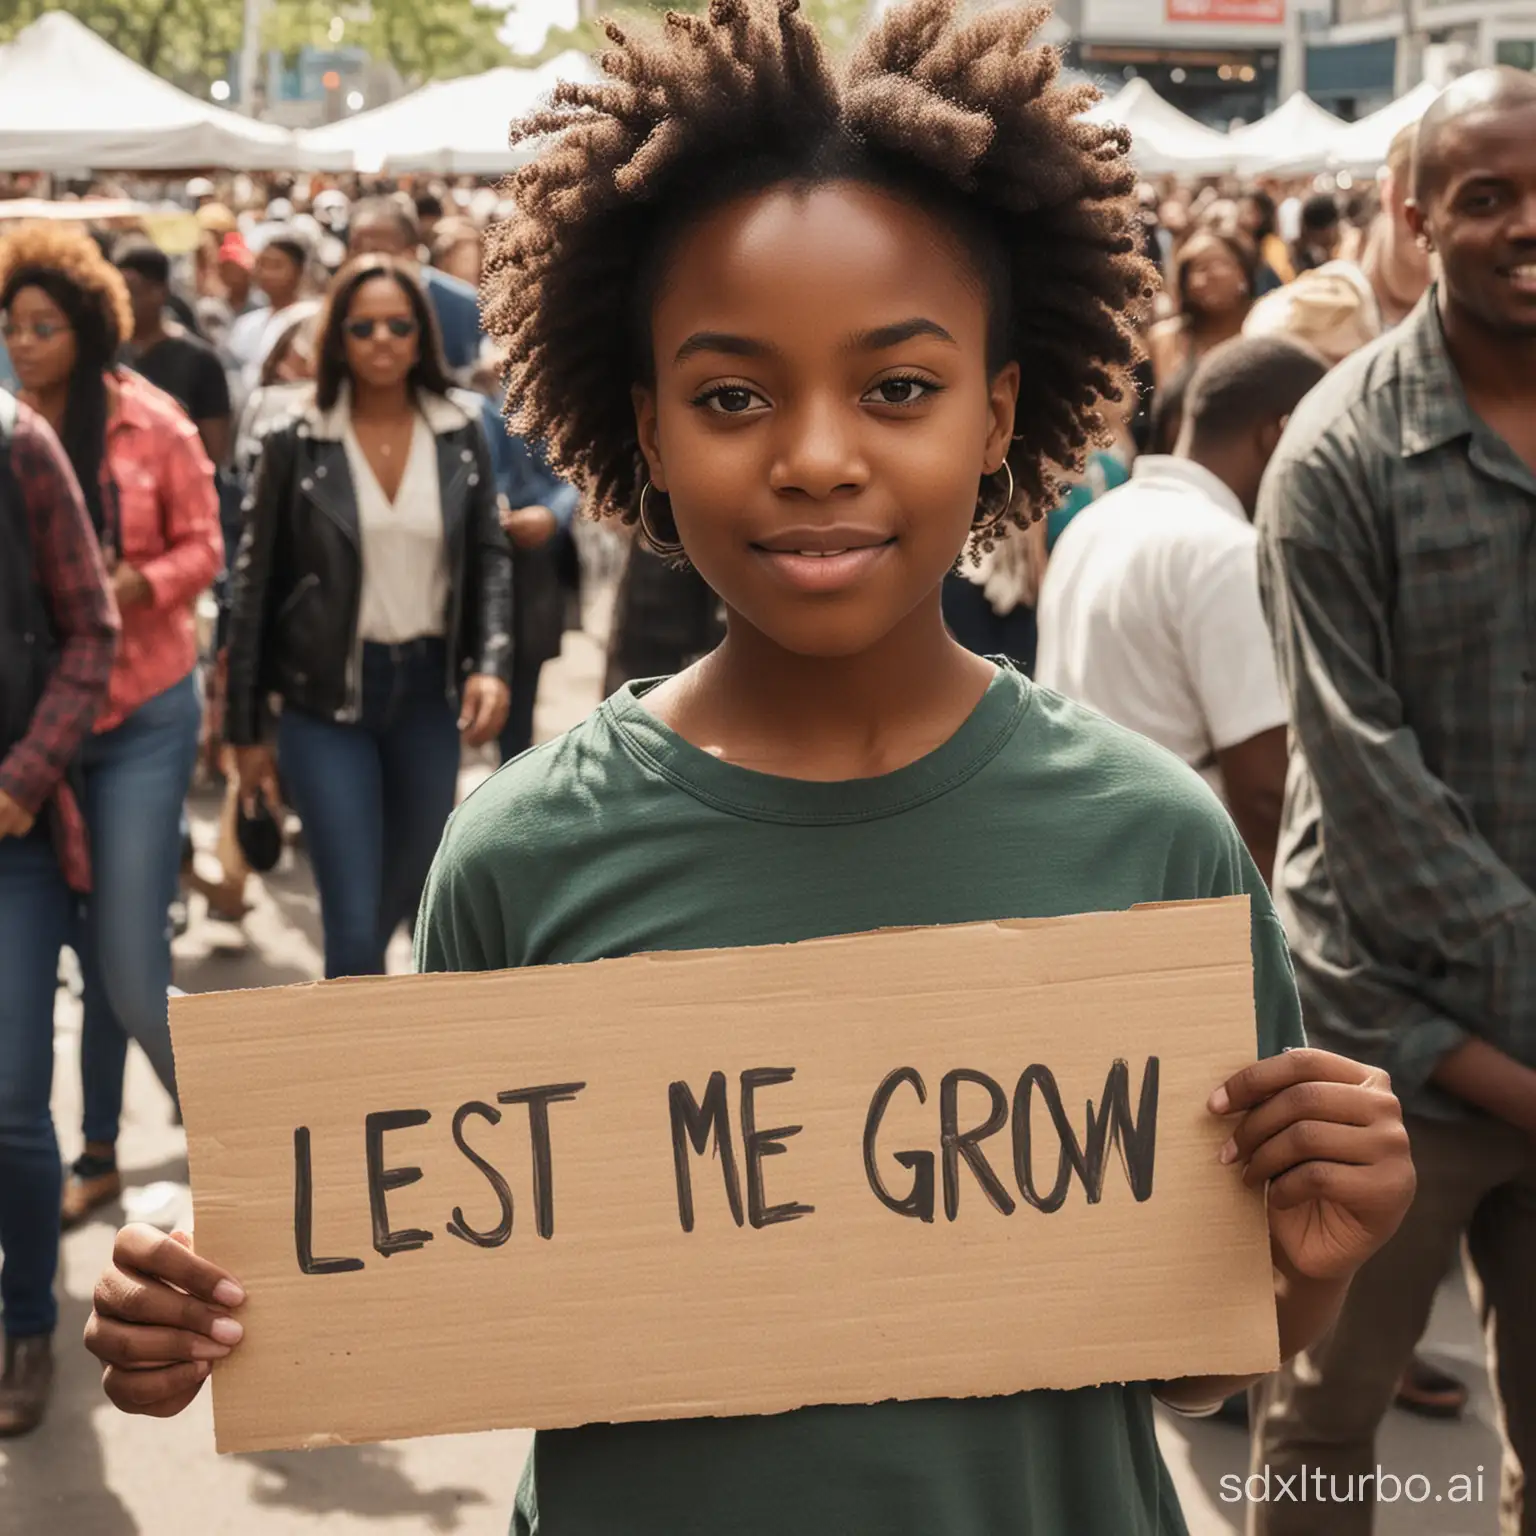 a black girl with a sign that says "let me grow" in a crowd market